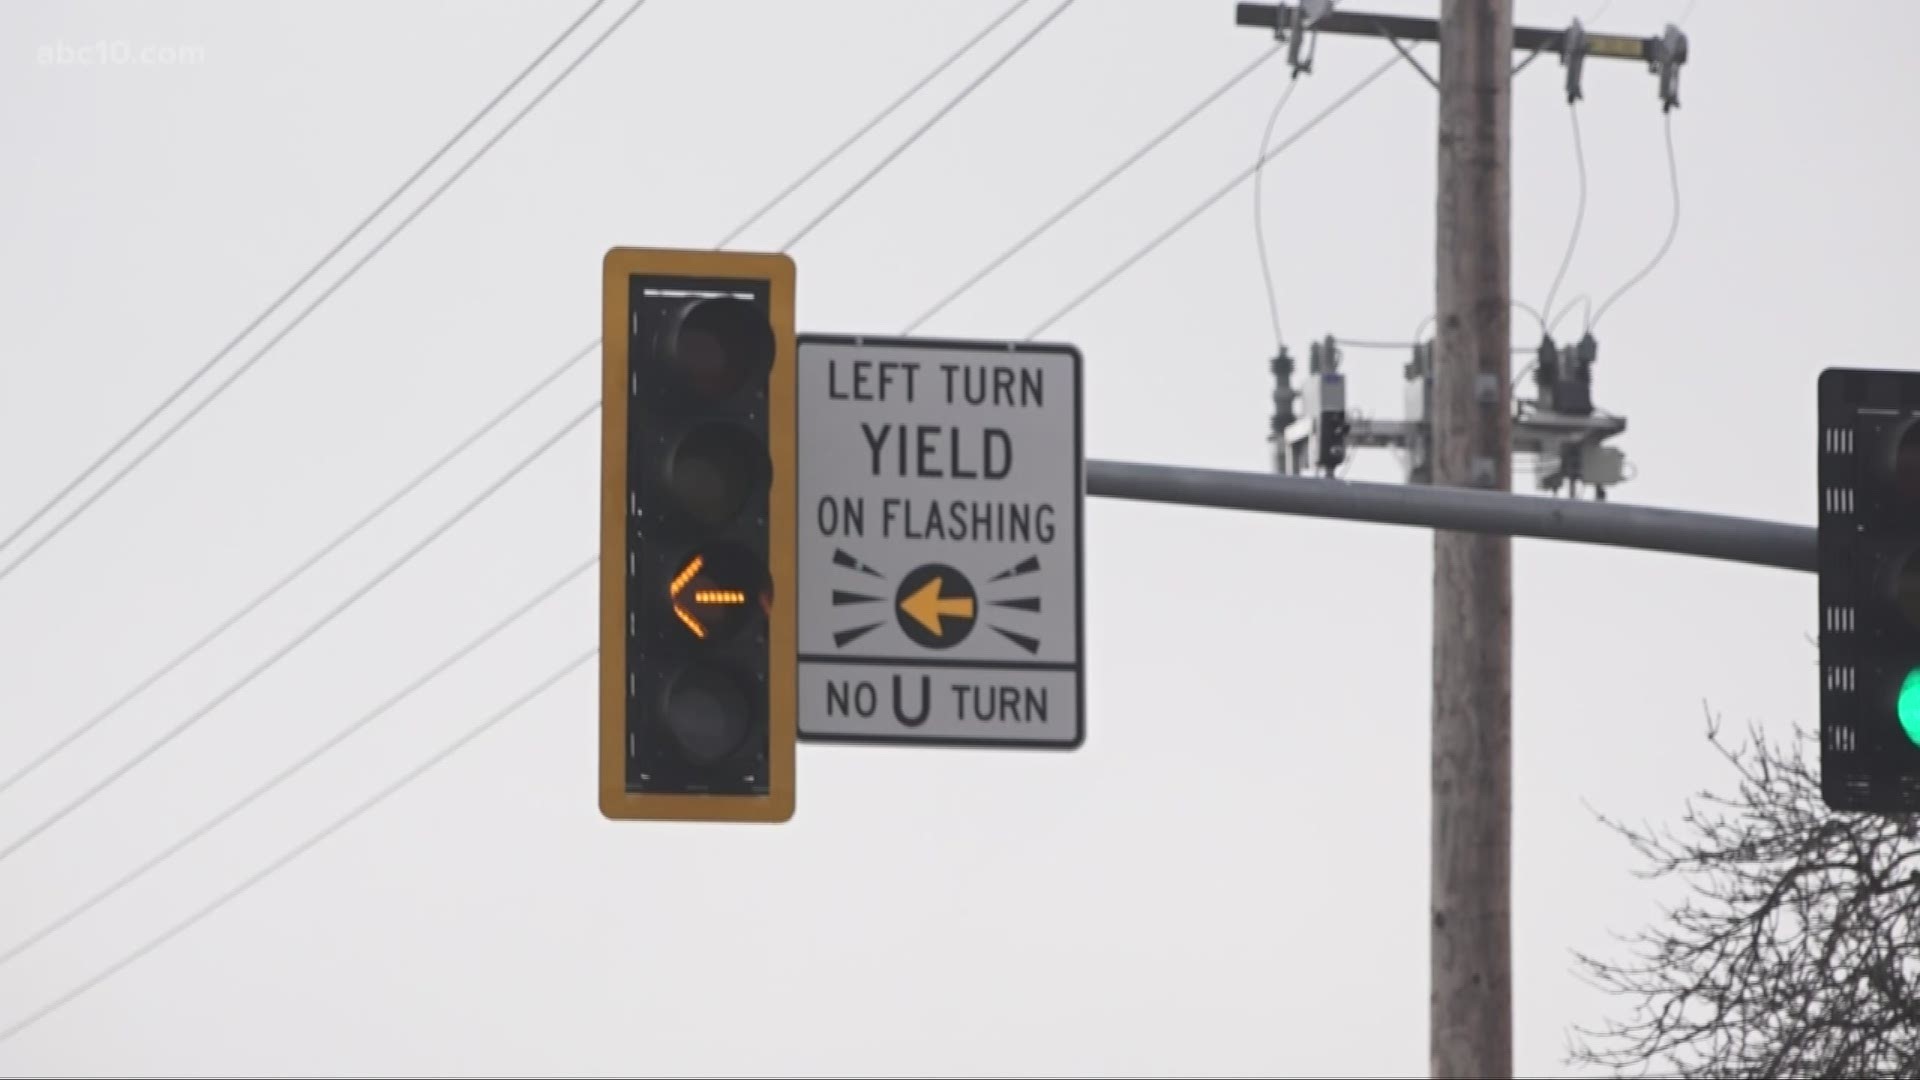 Do you know what to do at an intersection when you see a blinking, yellow left-turn light? If you’re driving in the Roseville area, you’d better be sure.